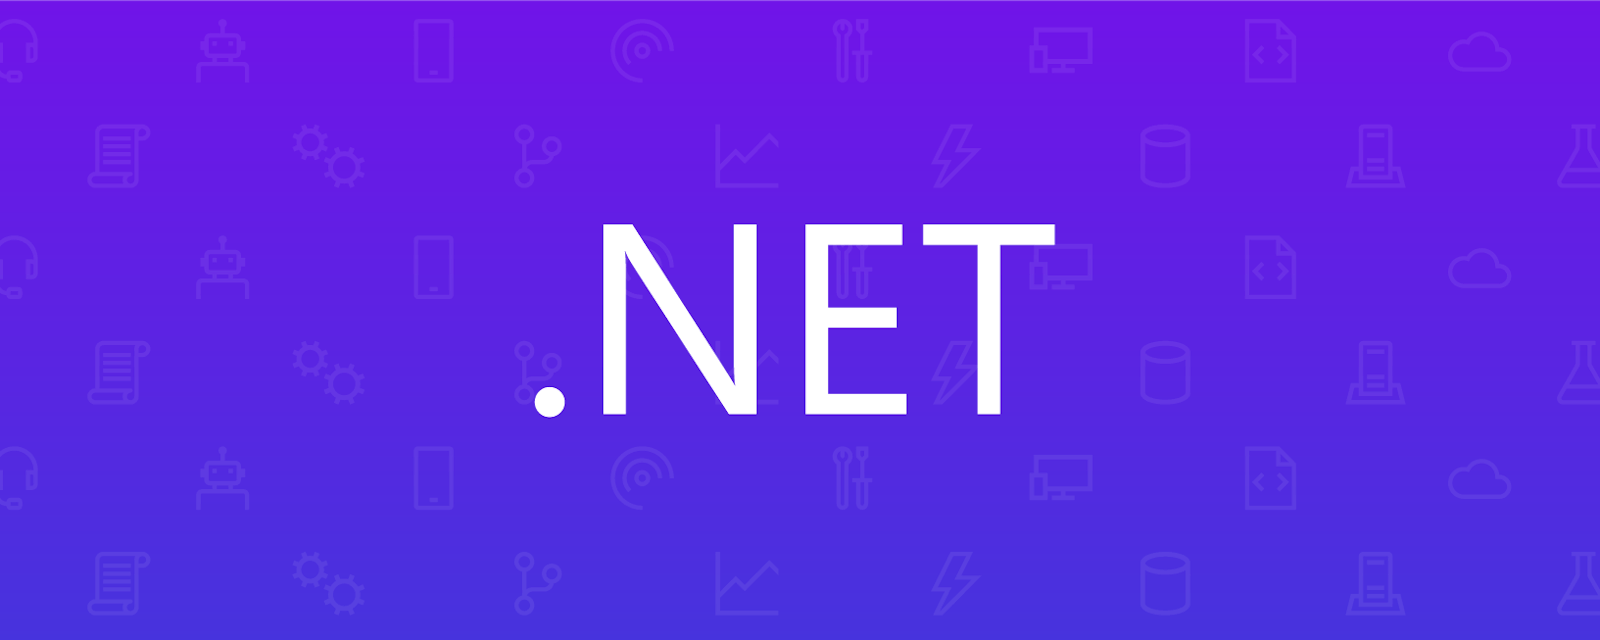 Awaiting .NET 8: A Look Back at the .NET Journey